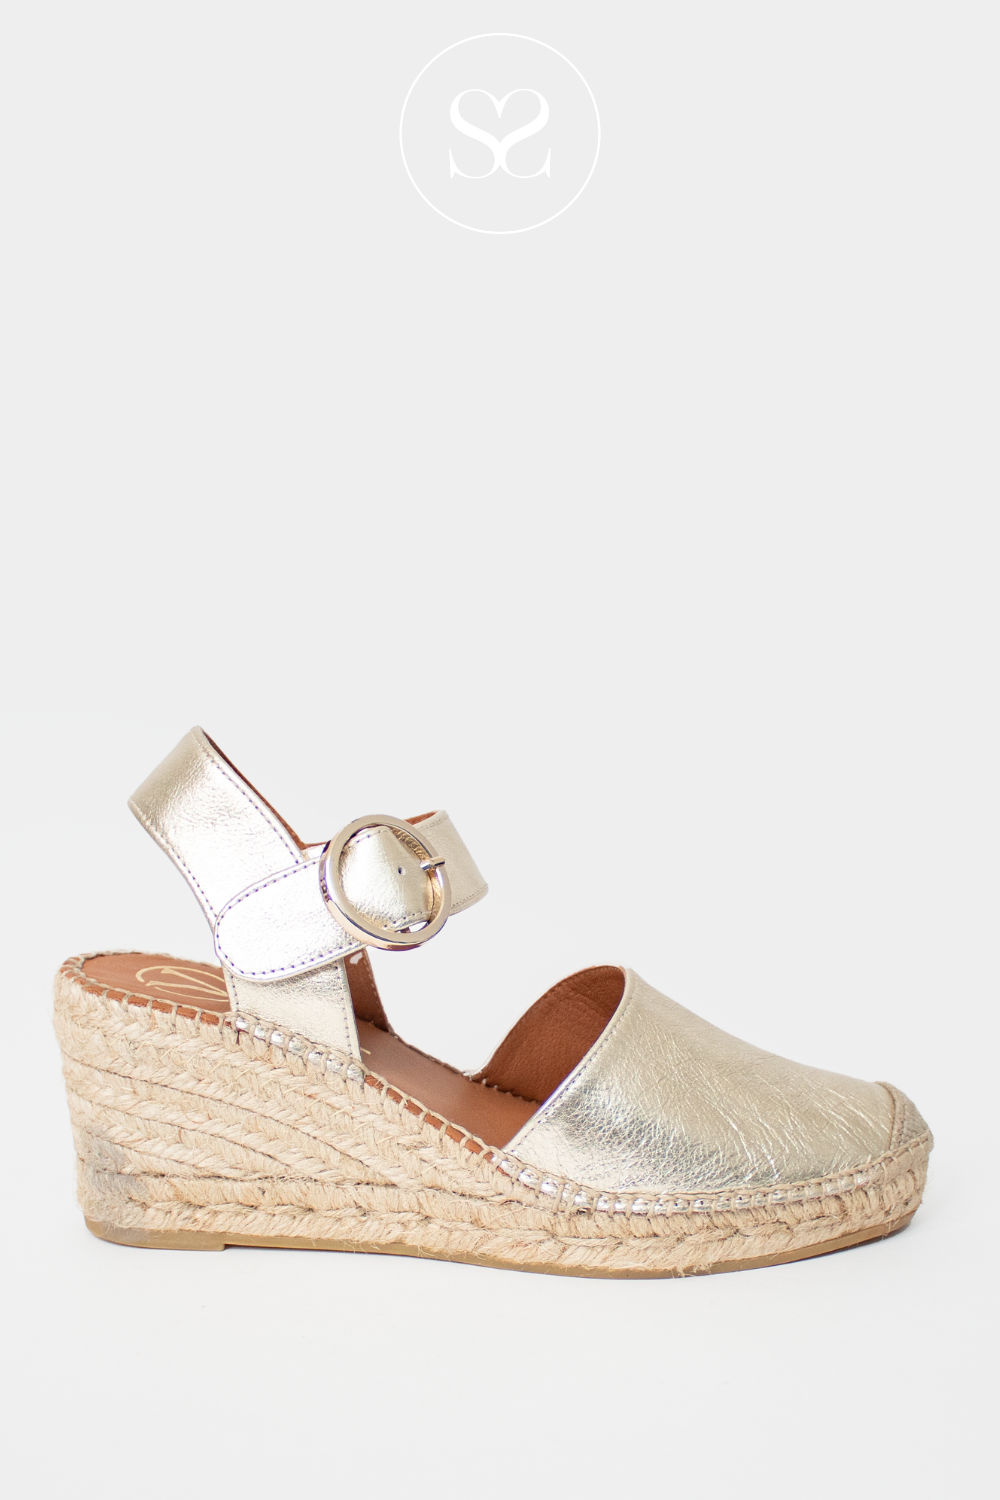 VIGUERA 1922 GOLD WEDGE ESPADRILLE SANDALS WITH CLOSE TOE FRONT AND EXPOSED HEEL. FRONT STRAP WITH BUCKLE DETAIL.